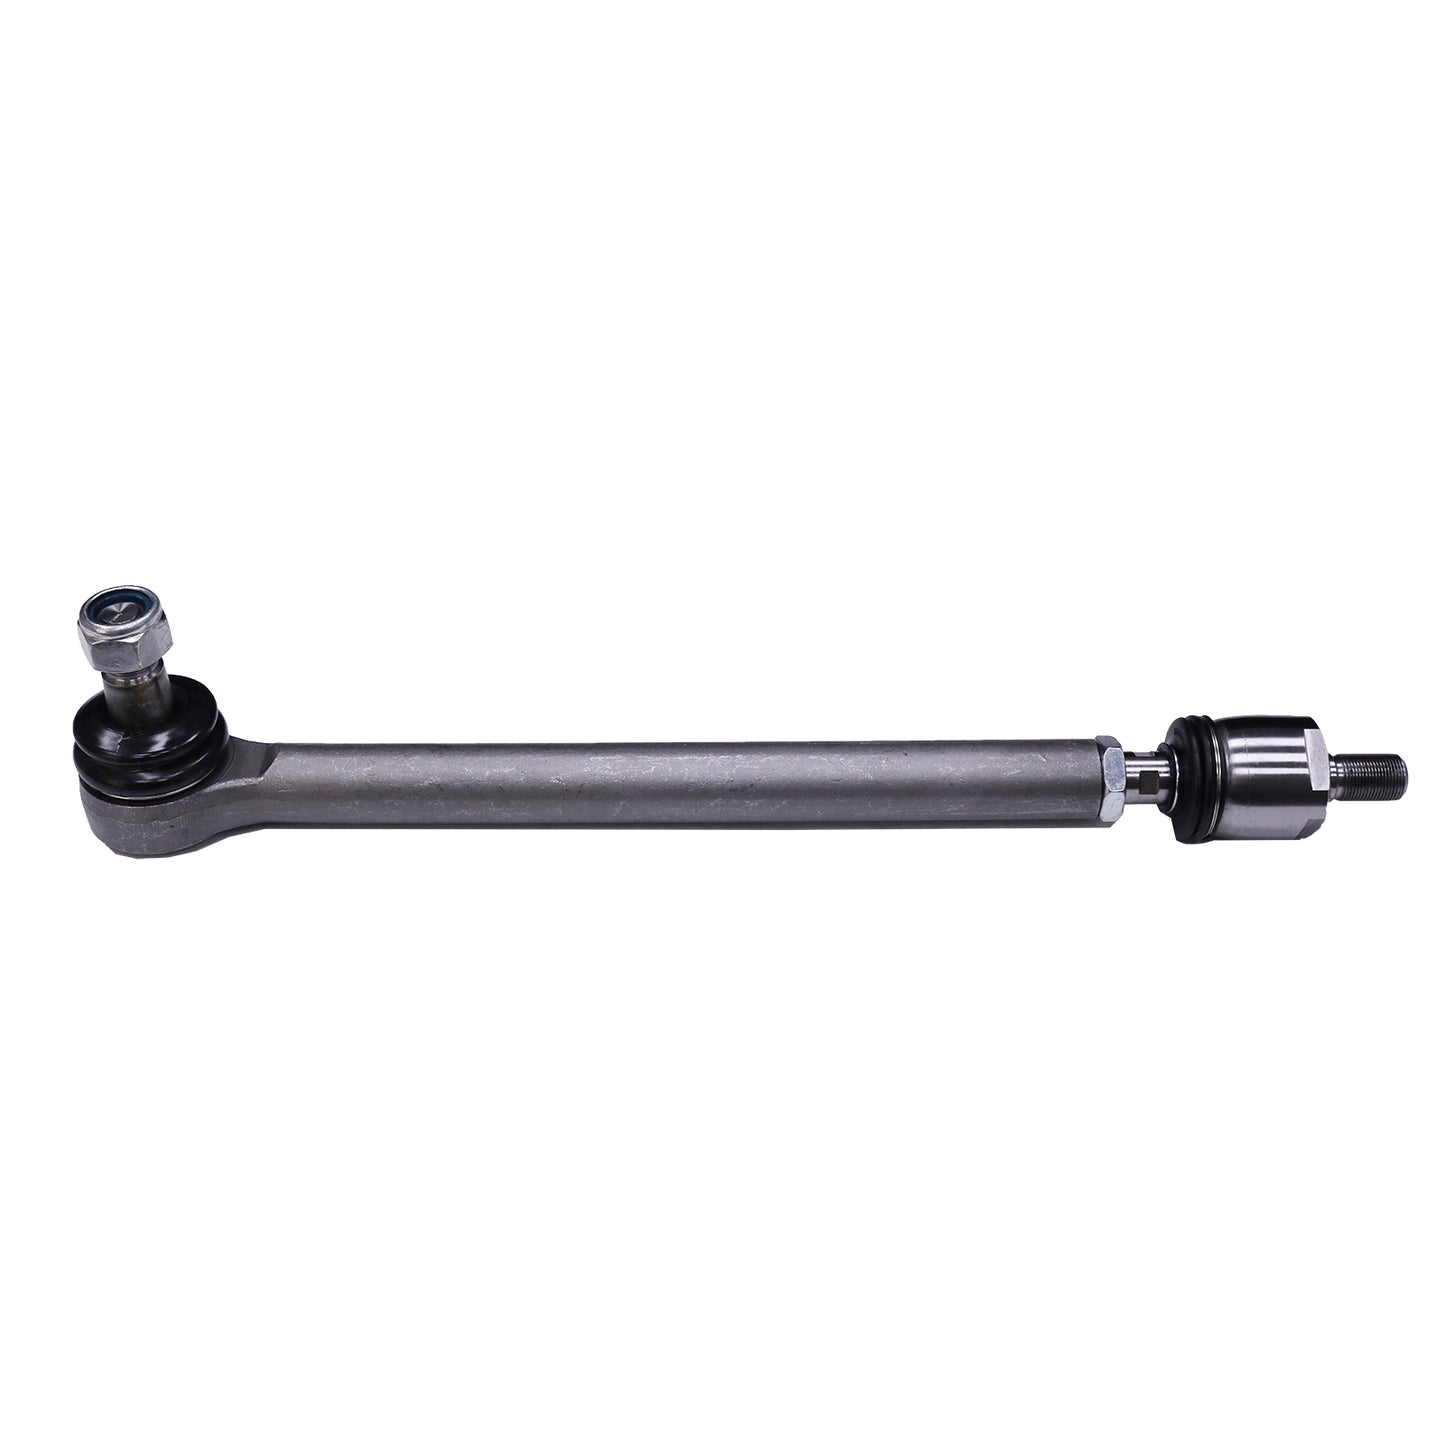 New 70046489 Articulated Tie Rod Compatible with JLG, SkyTrak, Gradall, Lull